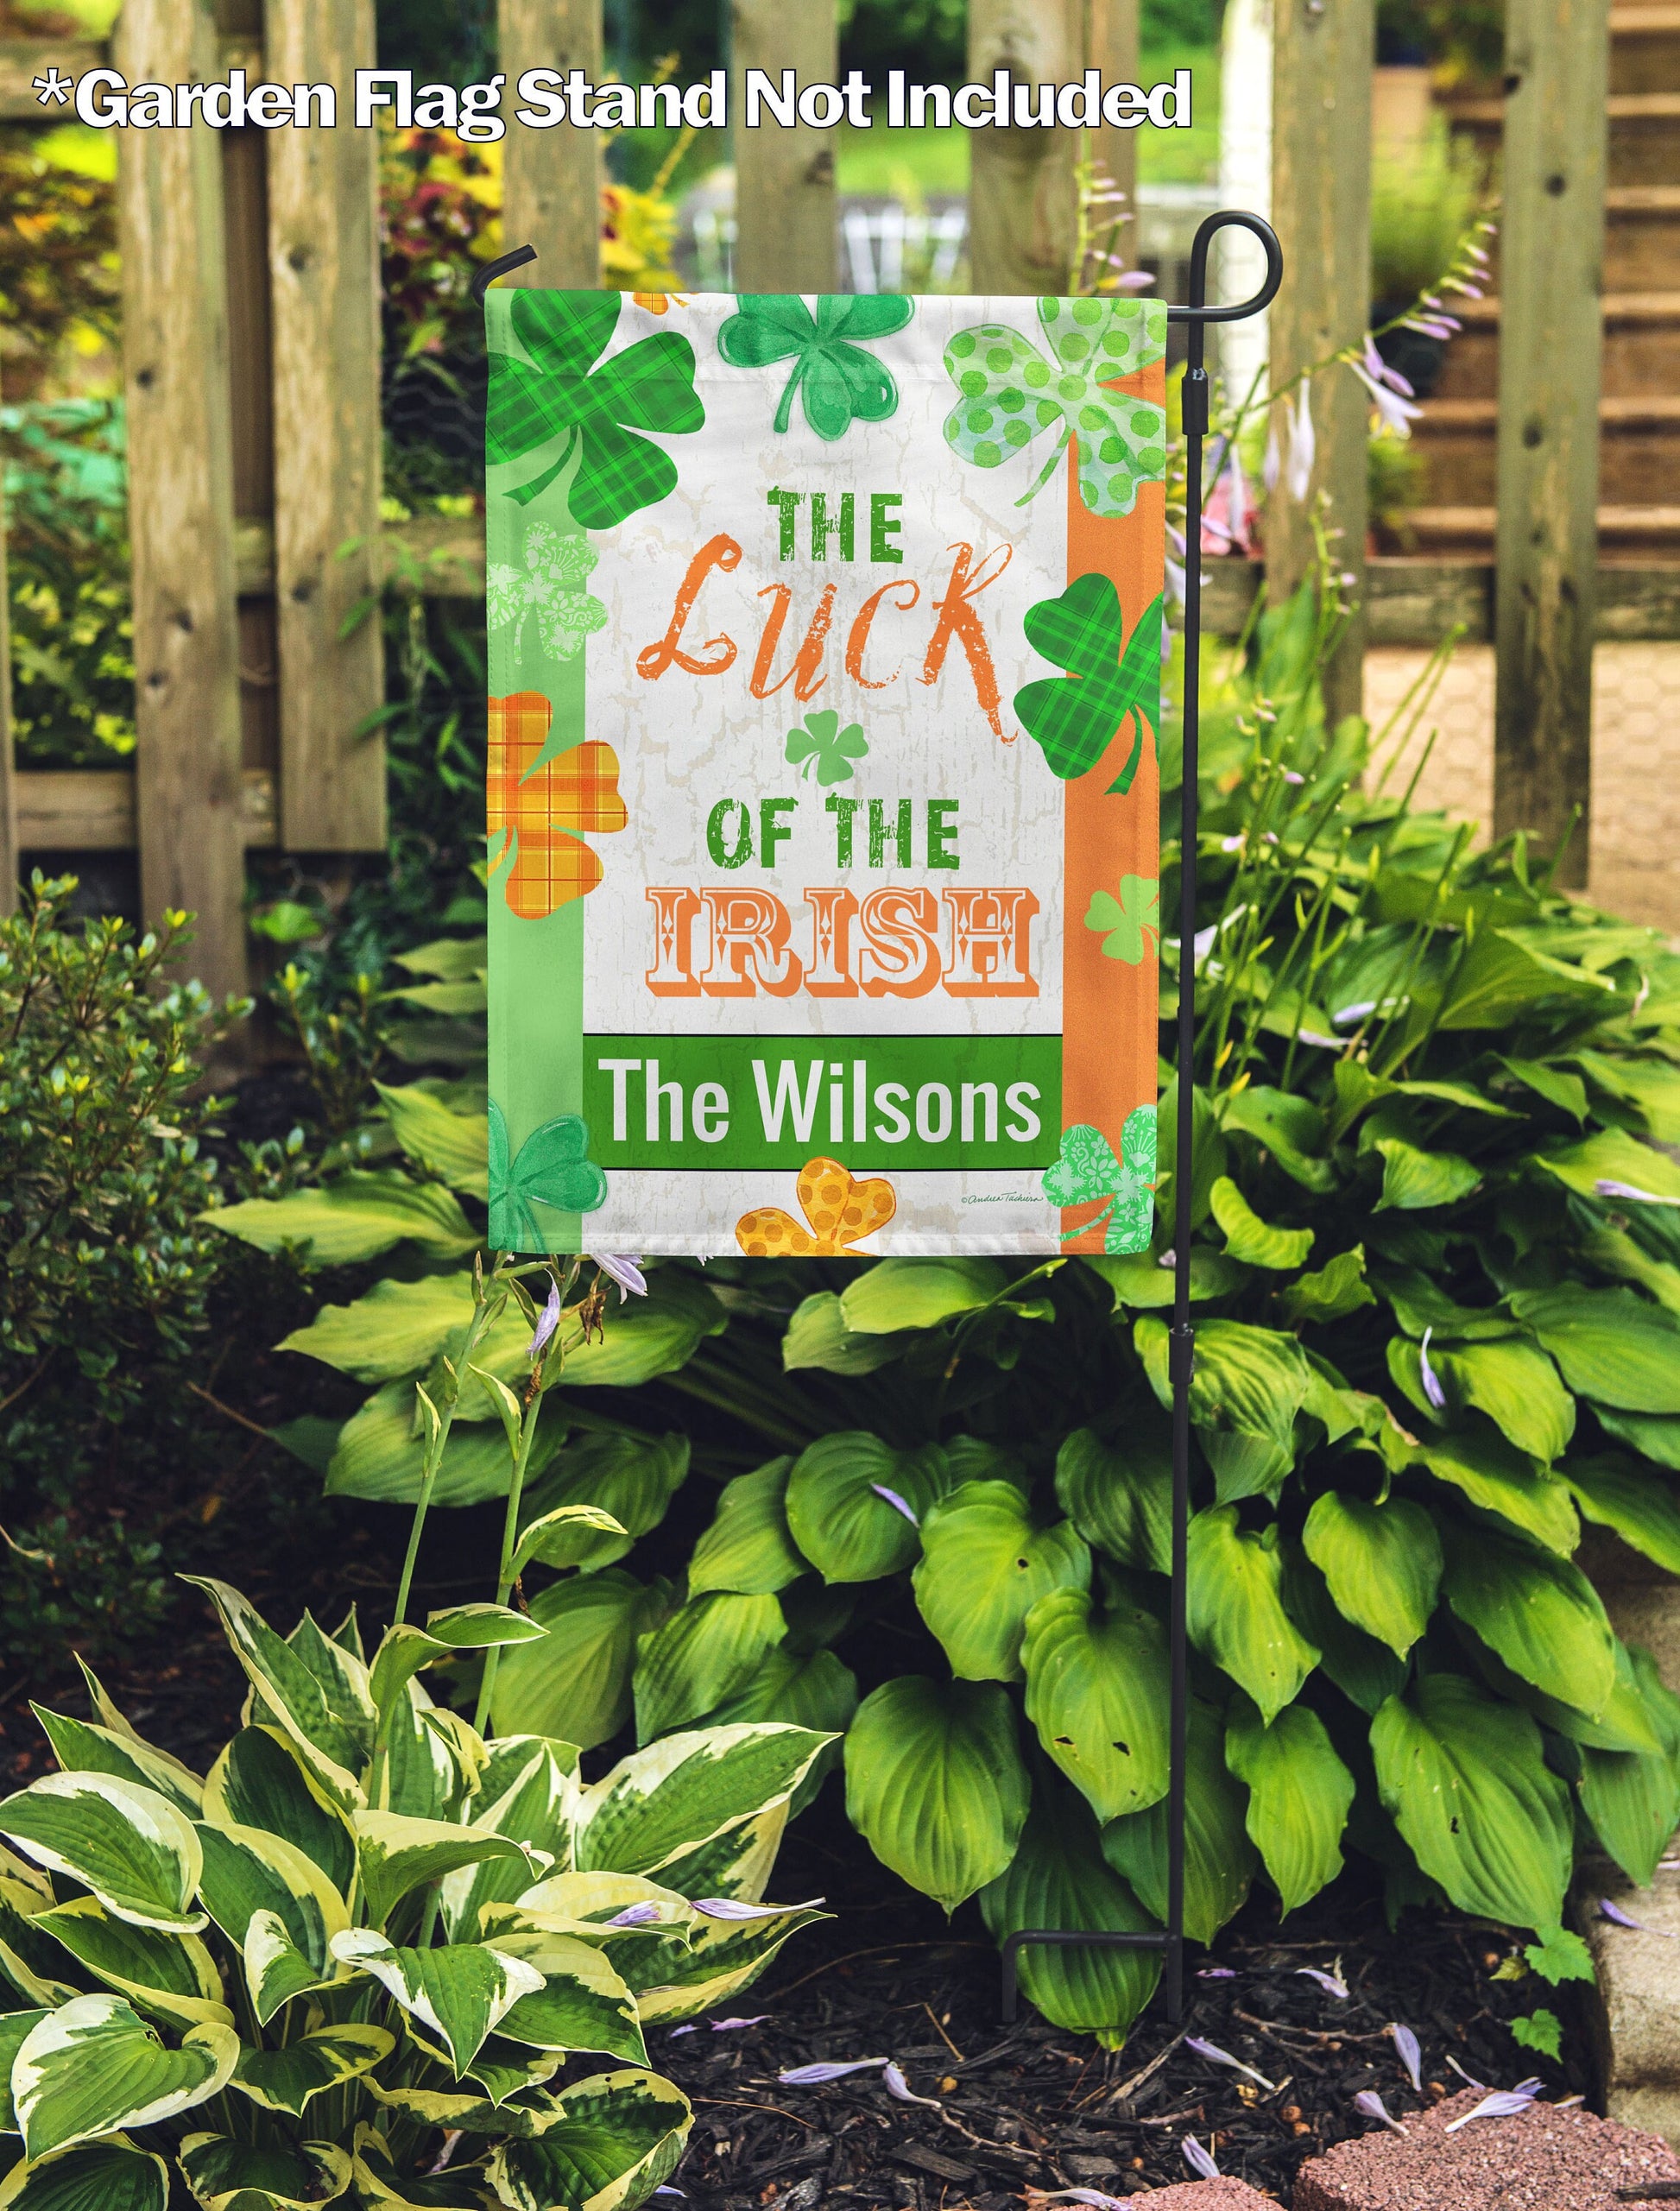 St. Patrick's Day Luck Of The Irish Cloversgarden Personalized House Flag - St. Patrick's Day Garden Flag - St. Patrick's Day Decorative Flags